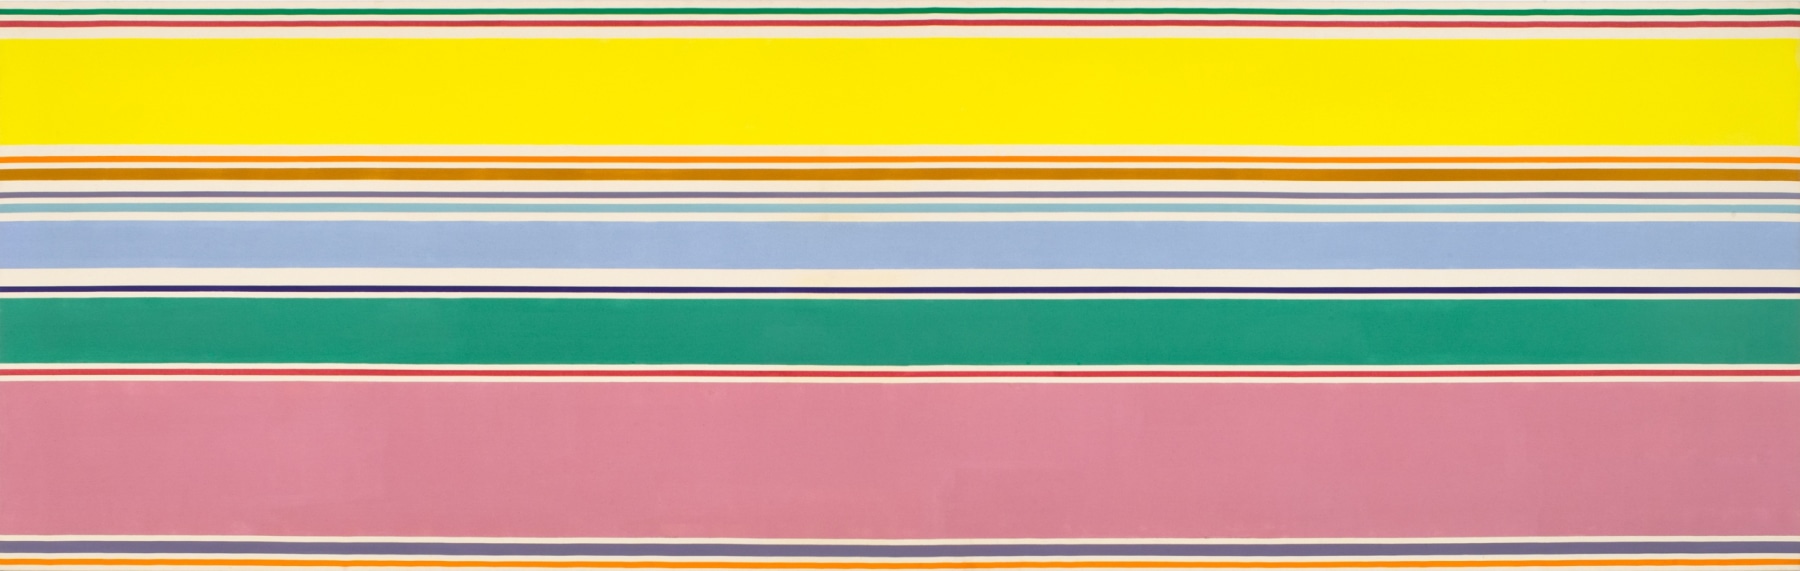 Color Pane

1967

Acrylic on canvas

48.5 x 153 inches

123.2 x 388.6cm